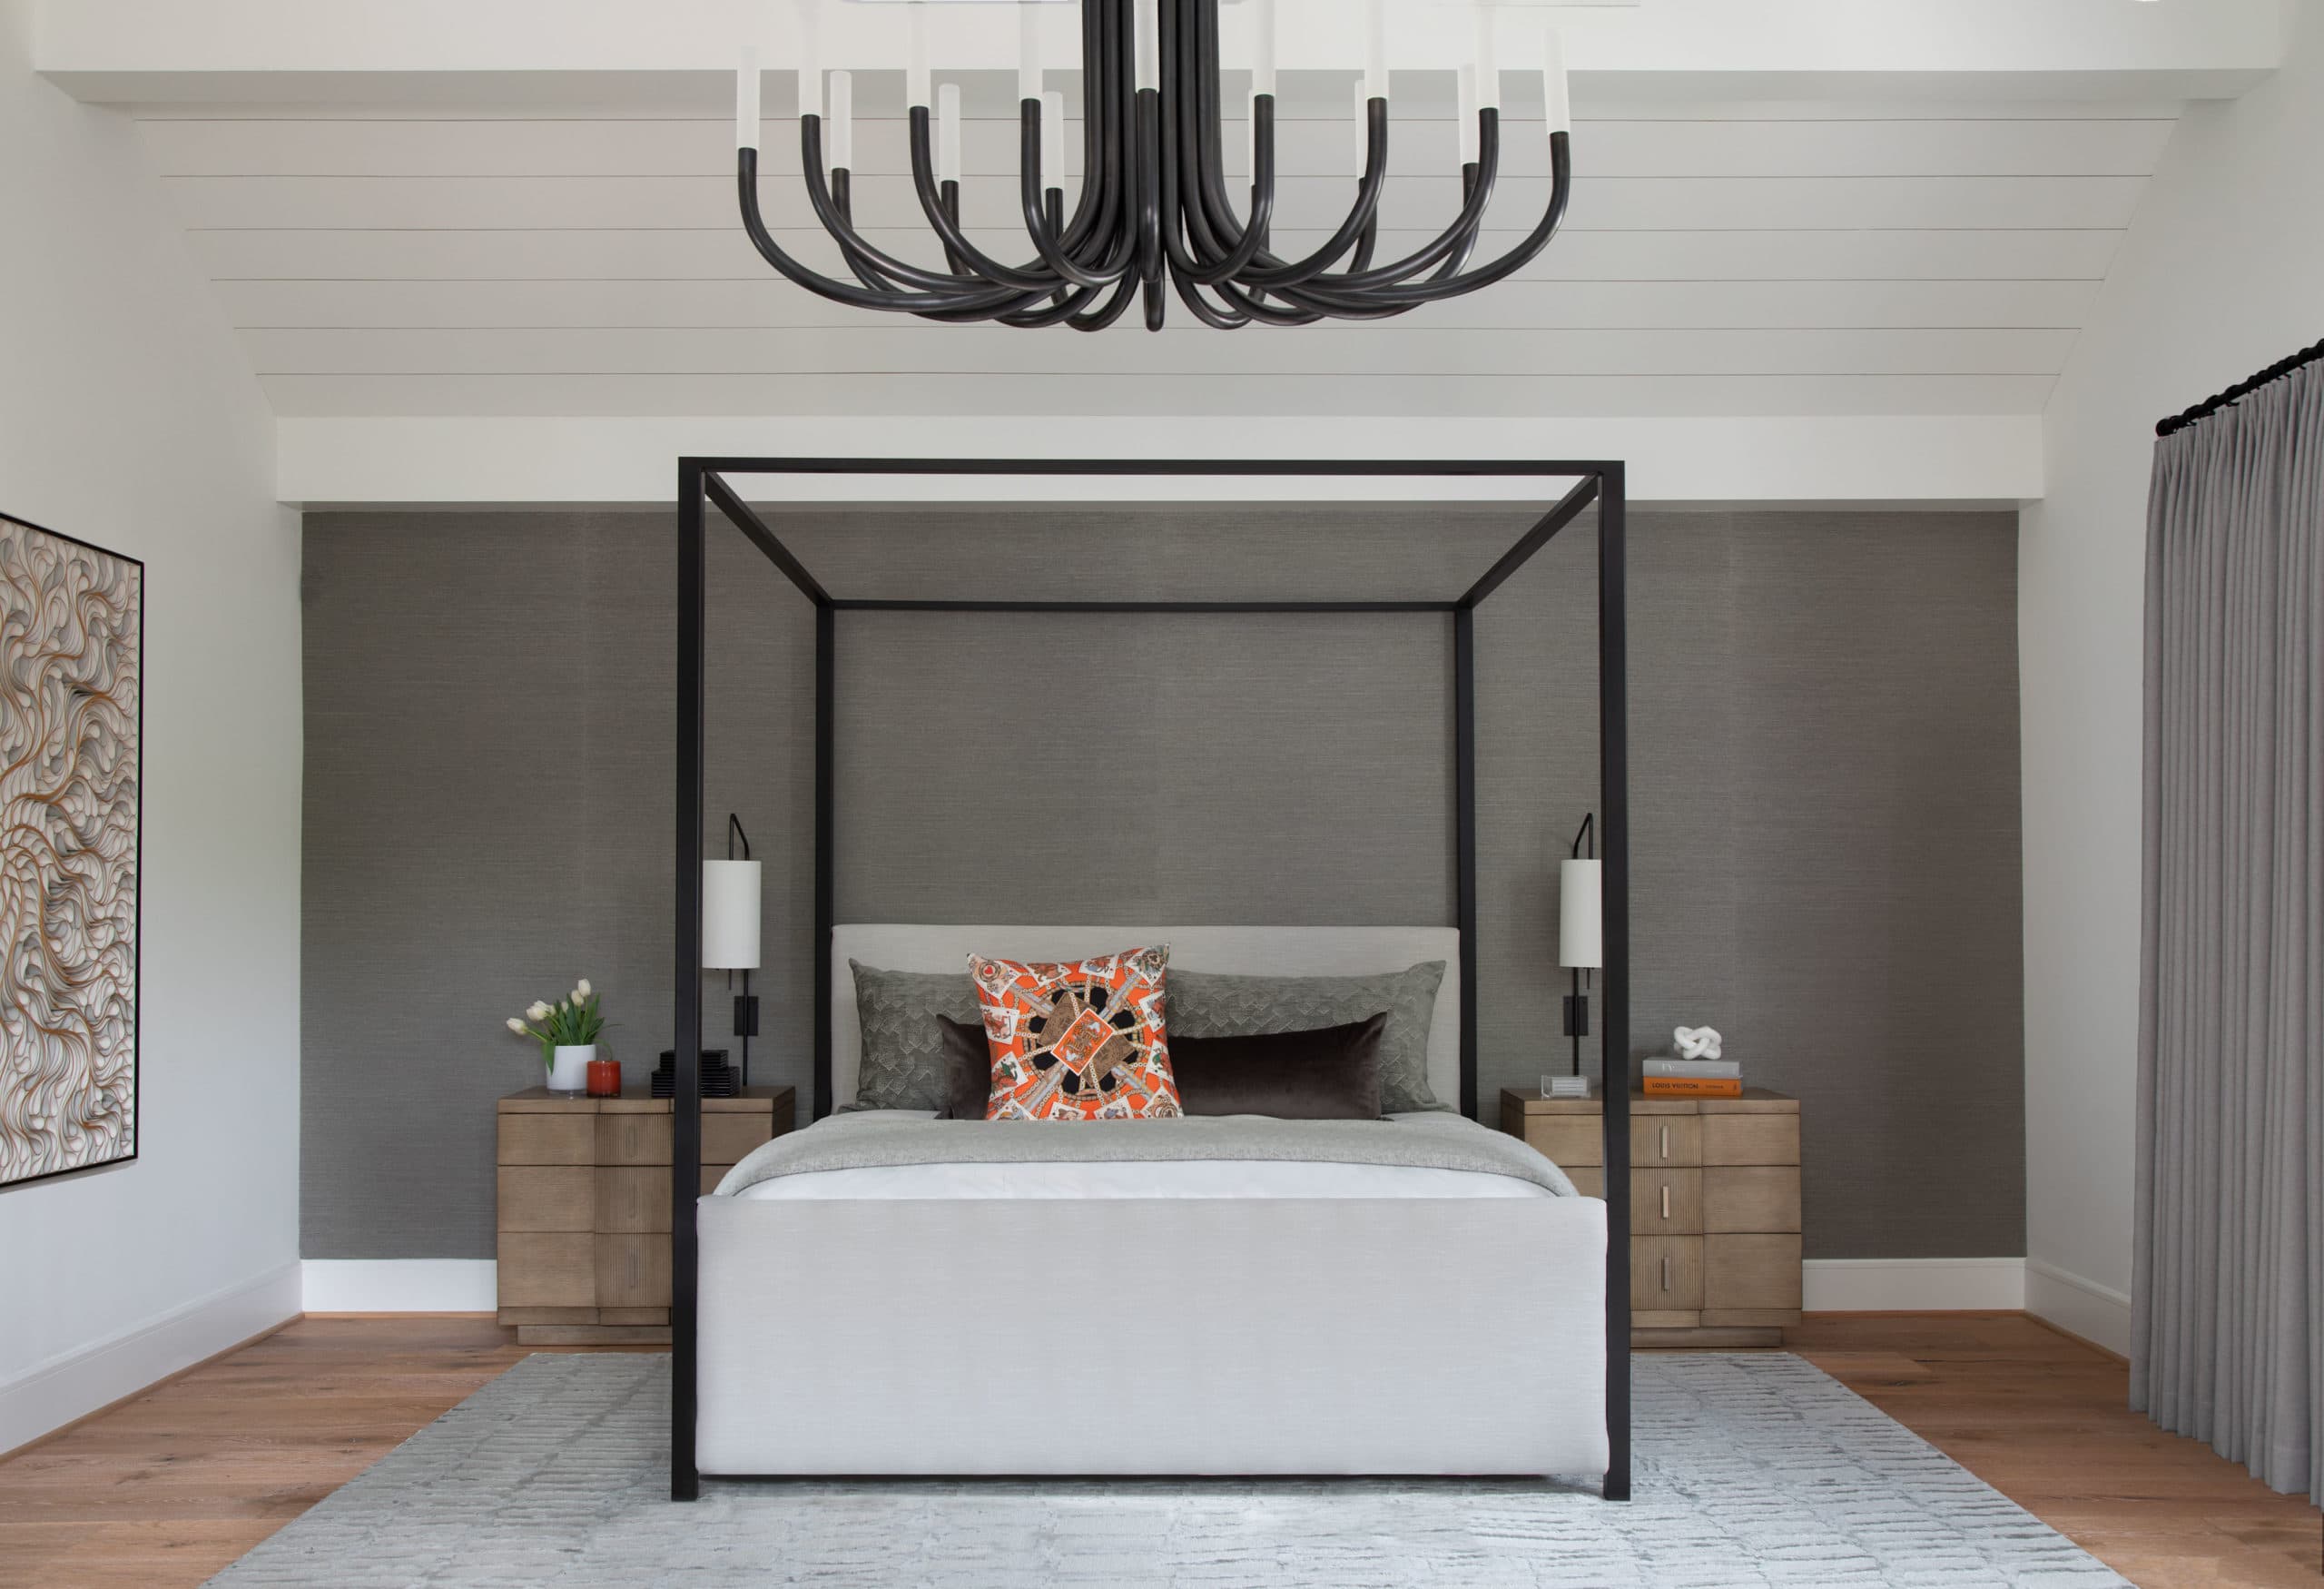 The grand master suite of a modern home in Houston, designed by Laura U